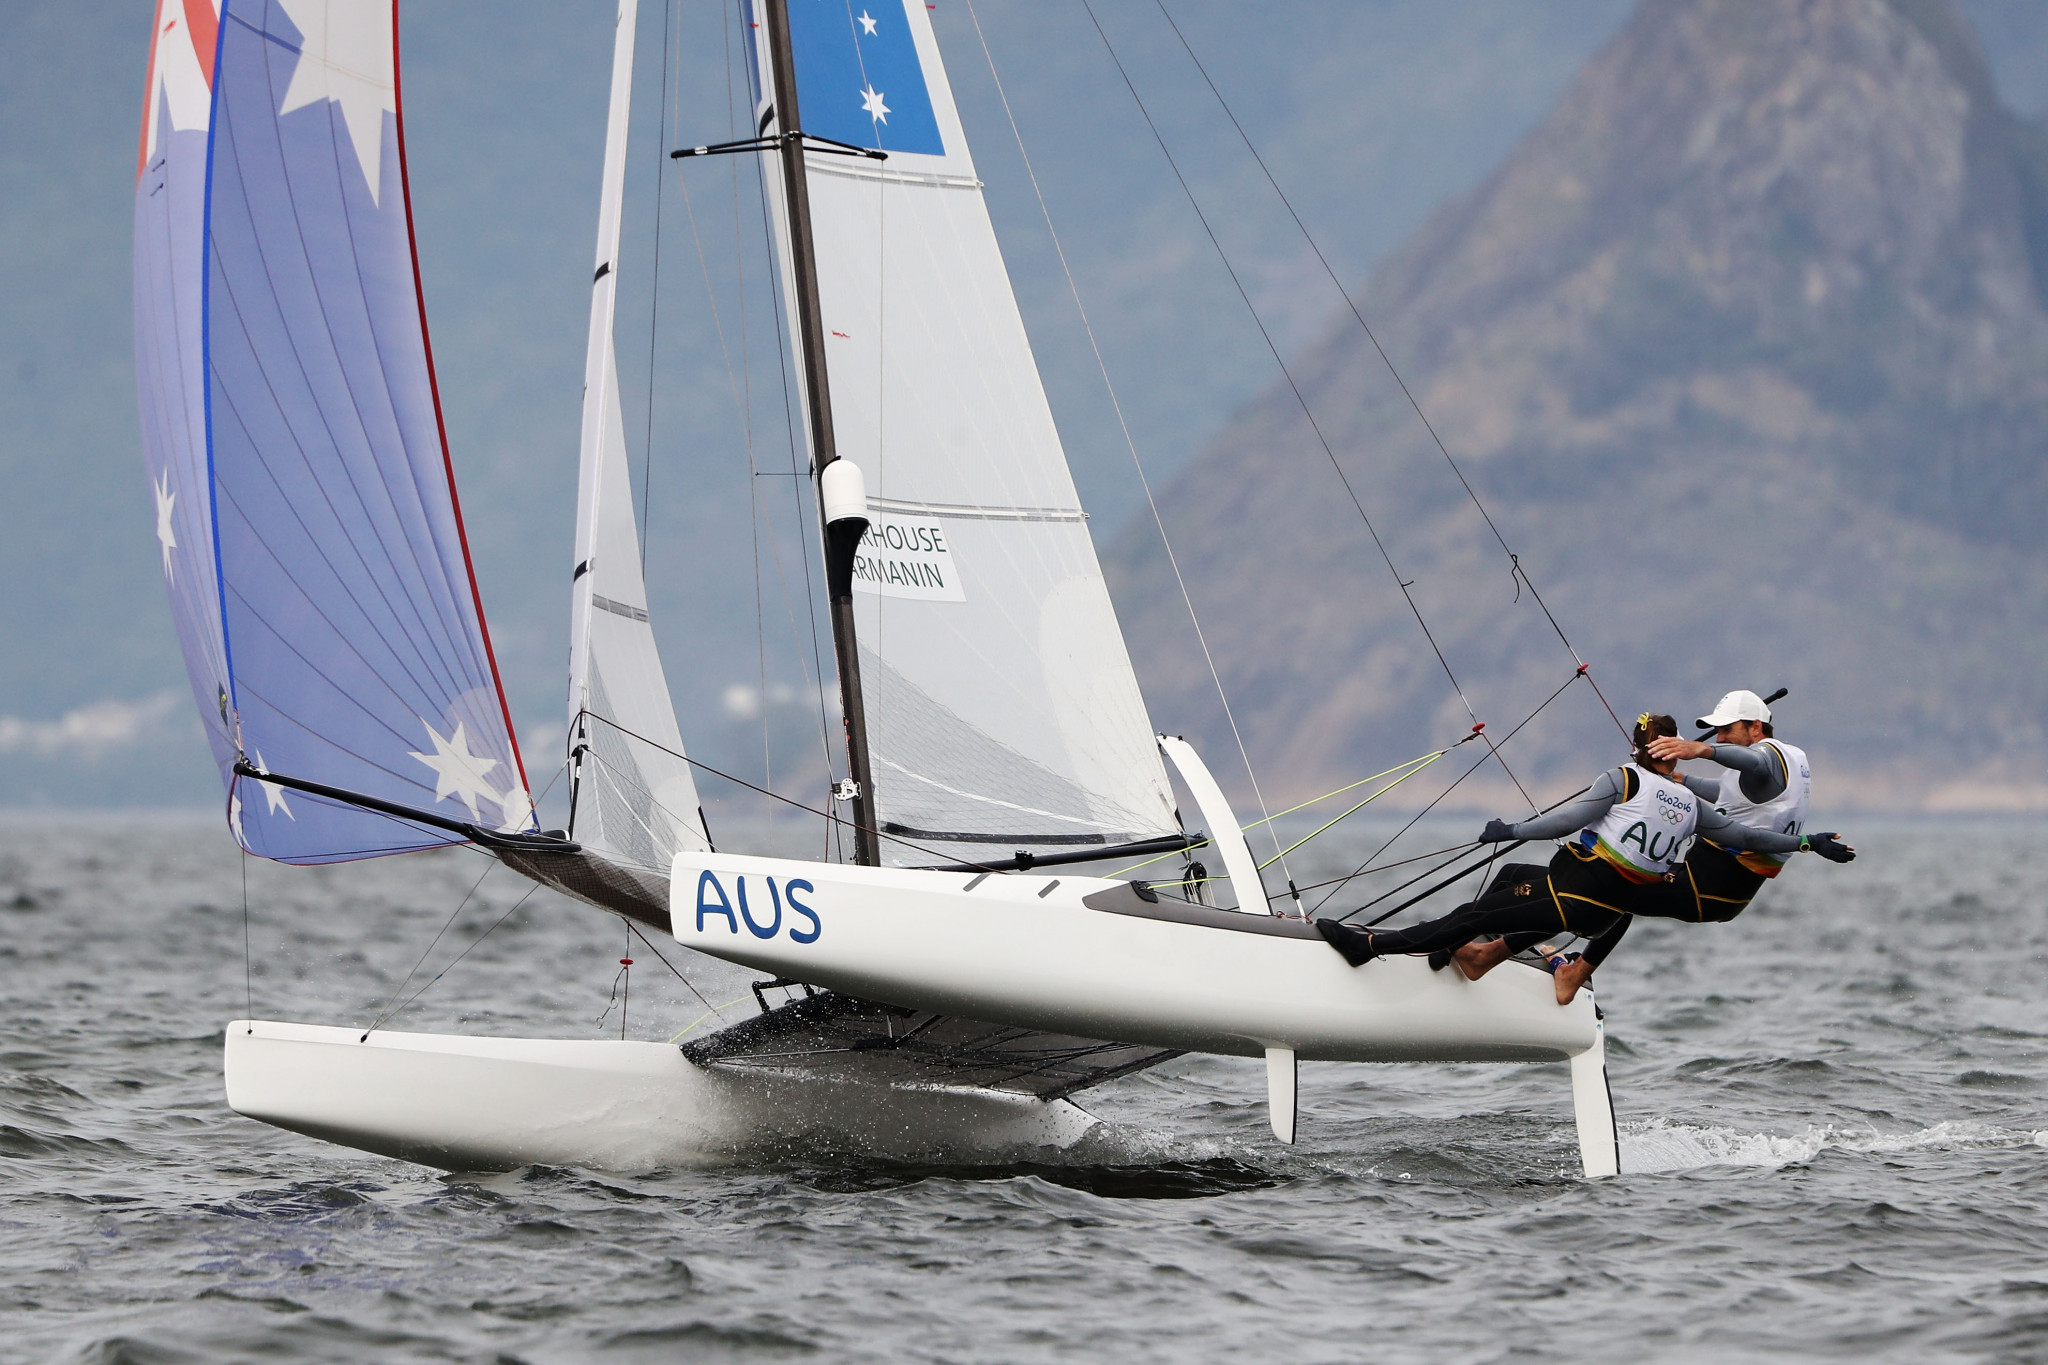 Auckland to host 49er and Nacra 17 World Championships in 2019